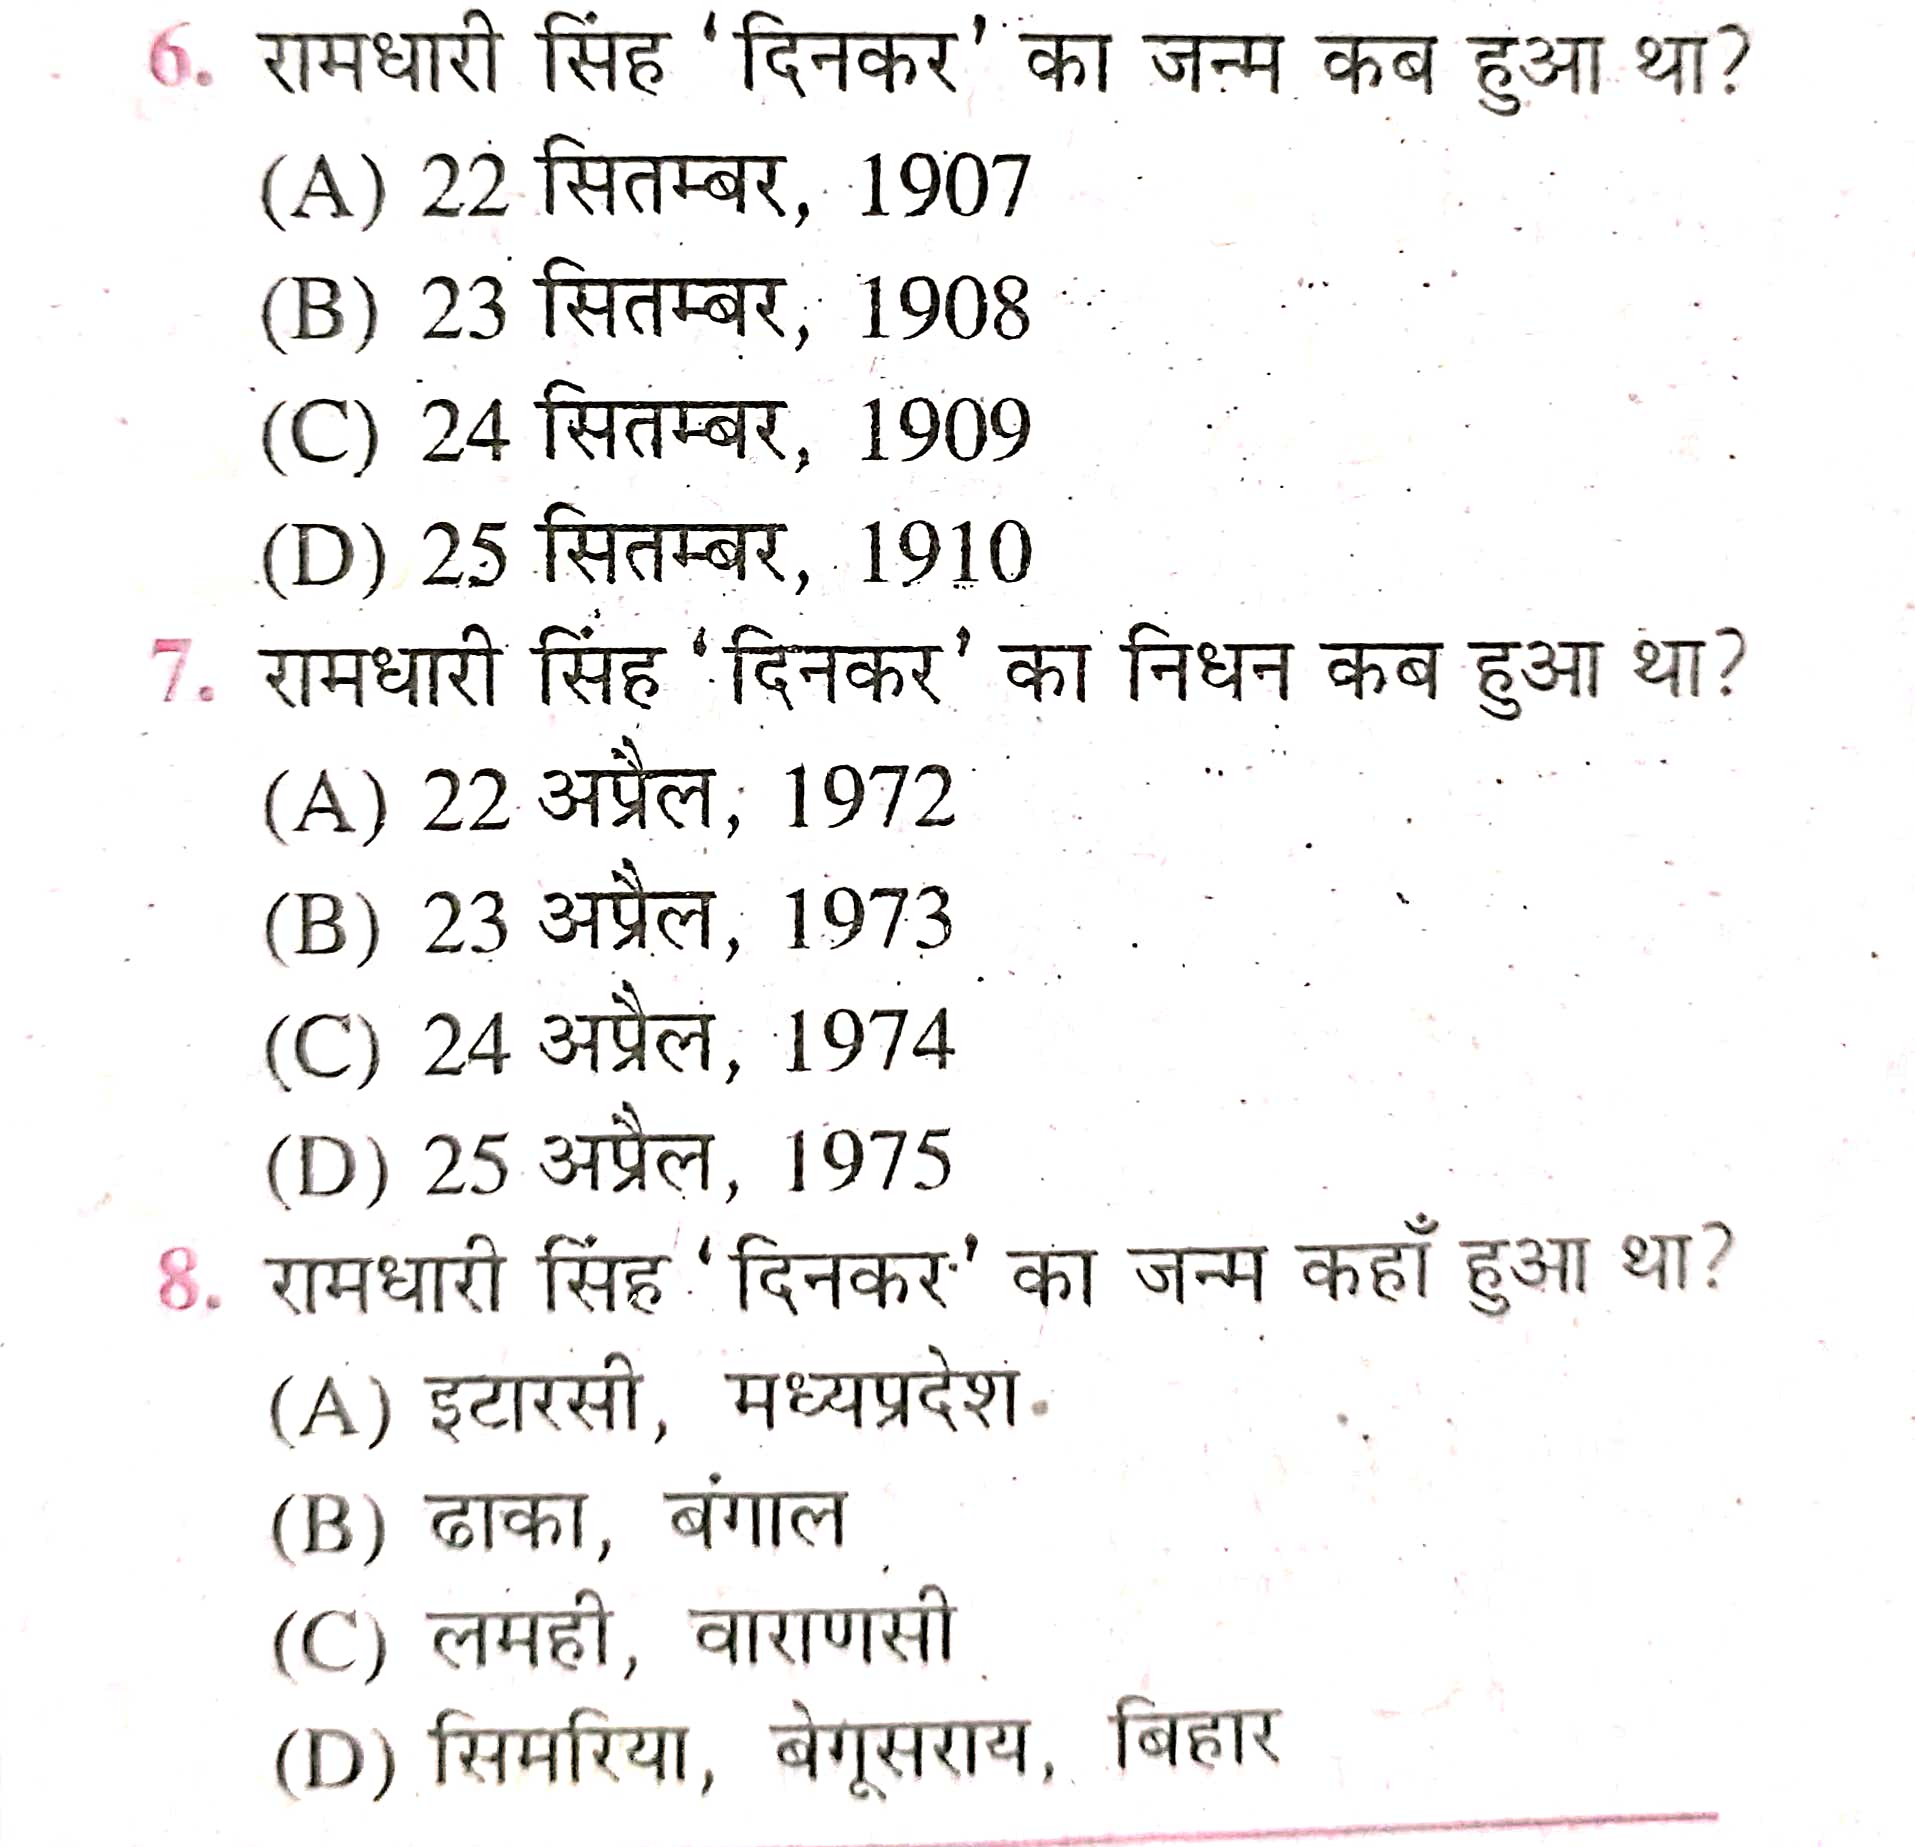 12th Hindi Chapter 4 objective question answer